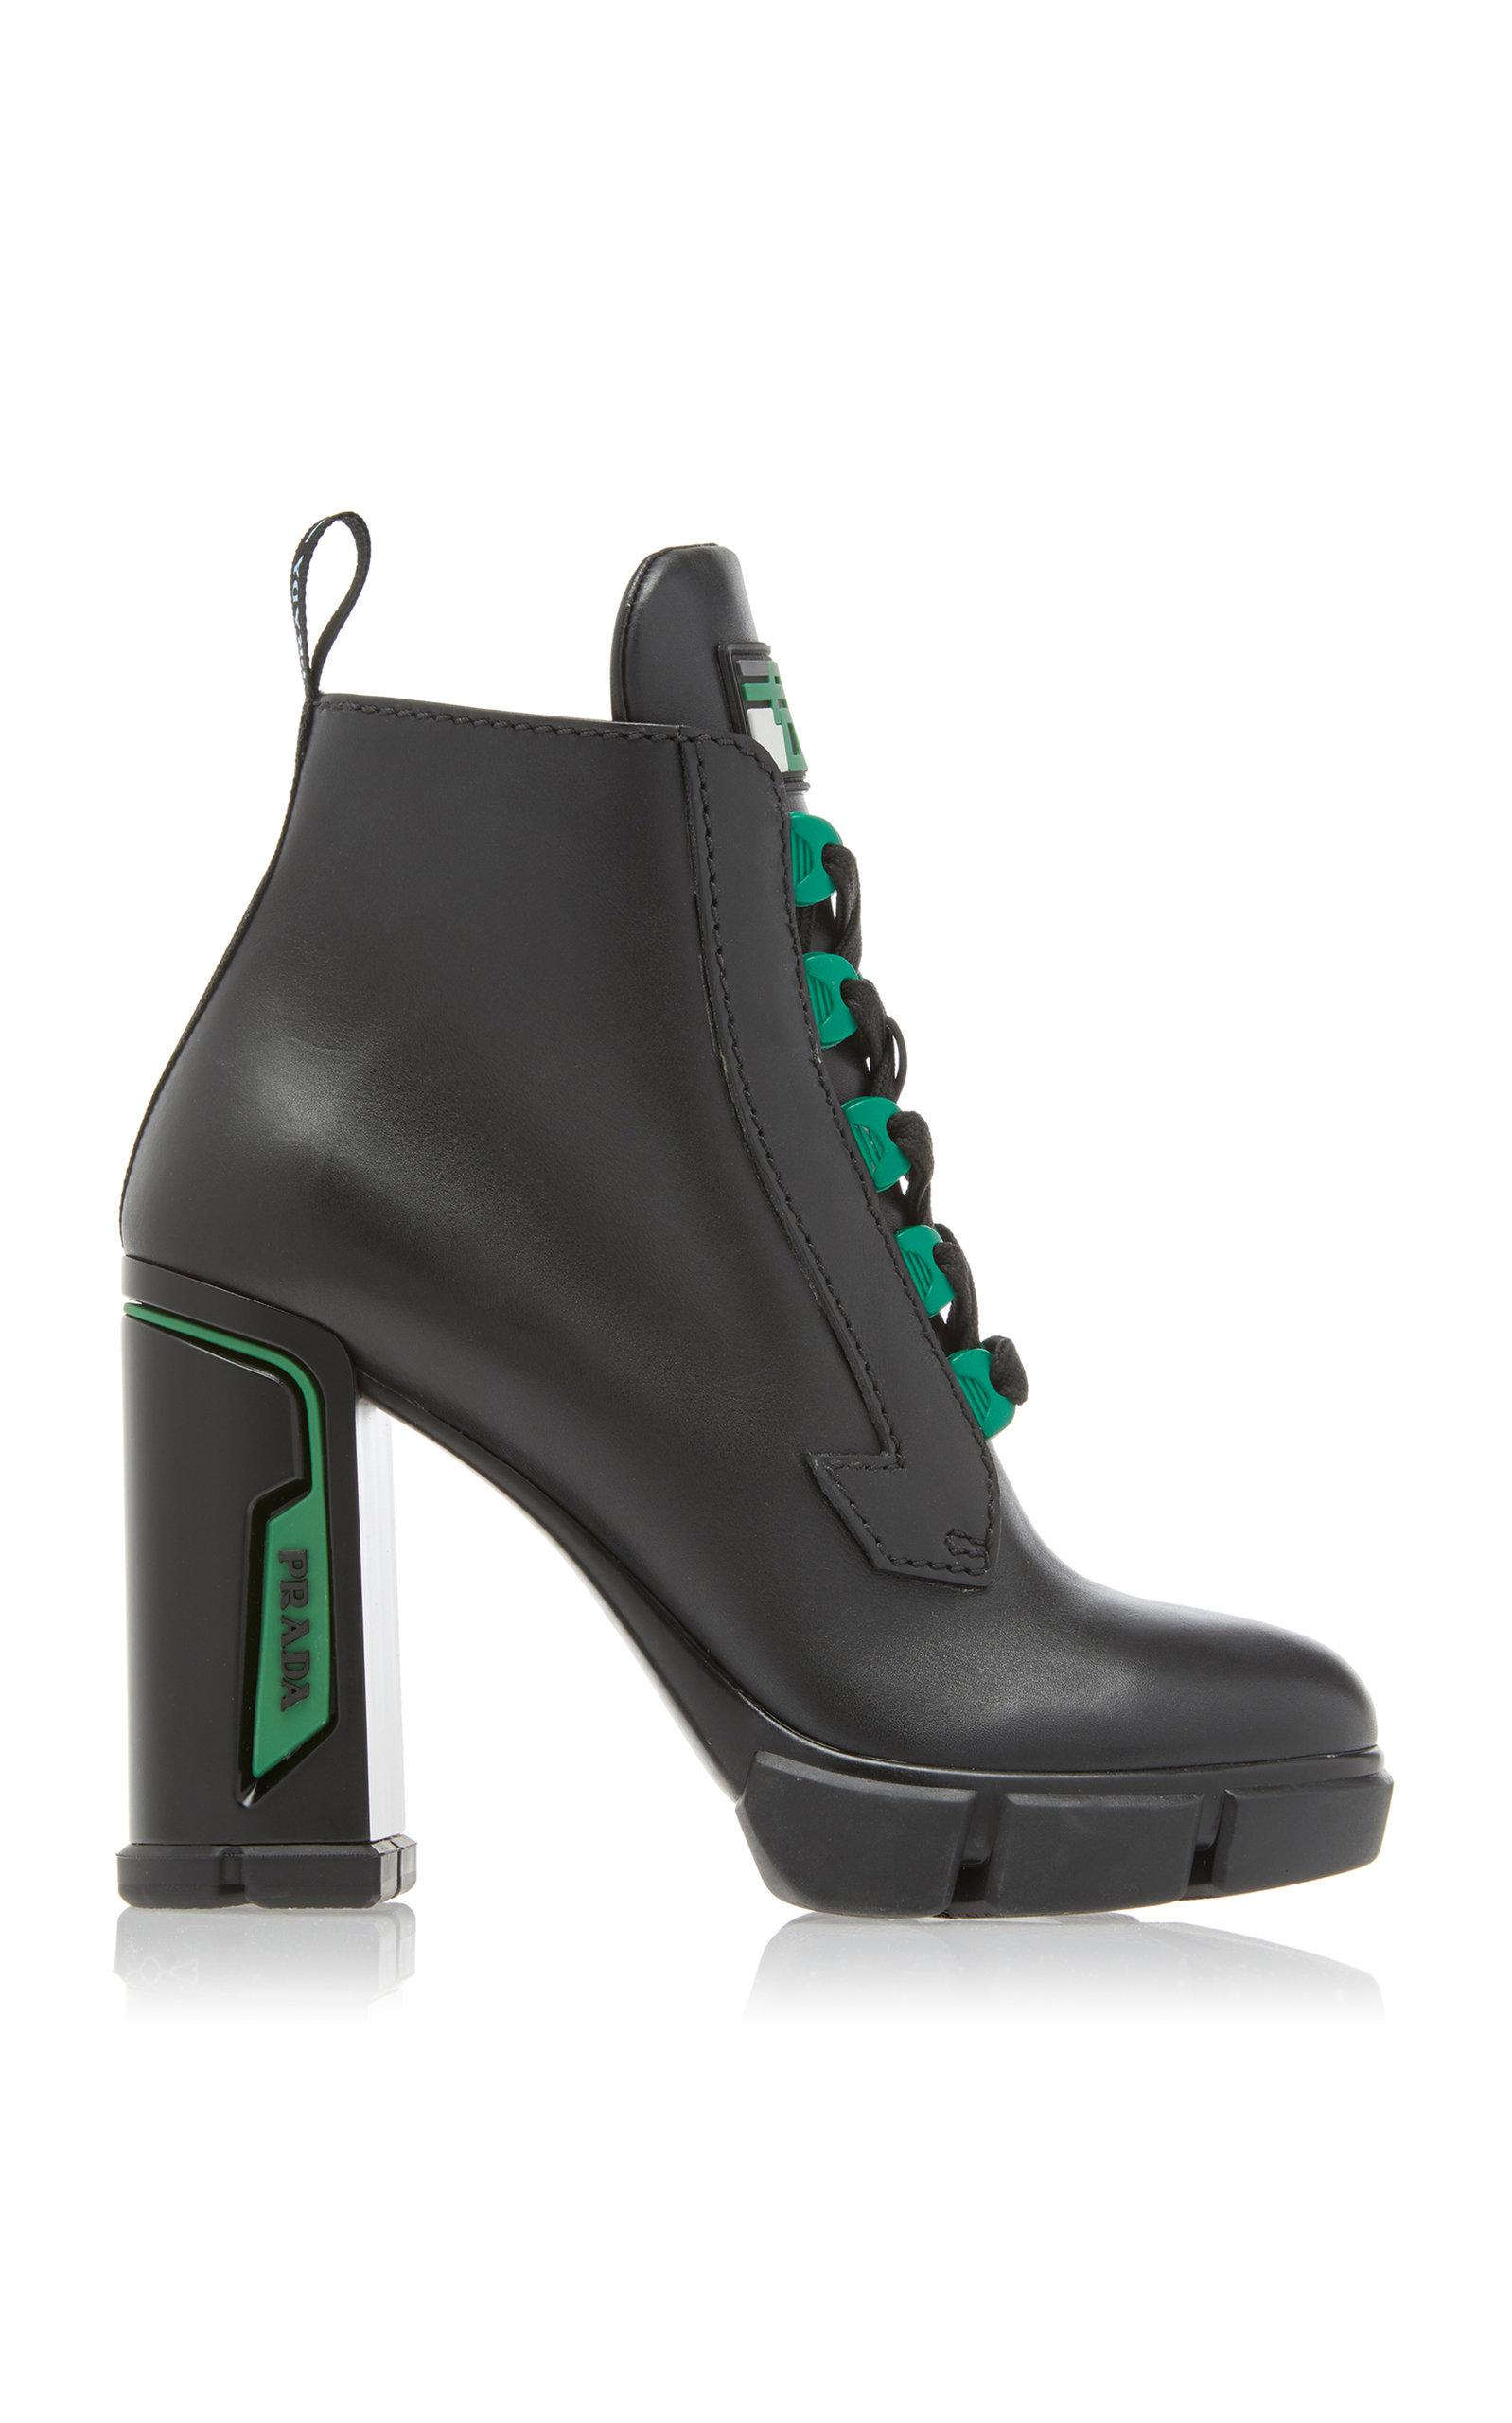 Prada Tronchetti Leather Ankle Boots in Black | Lyst